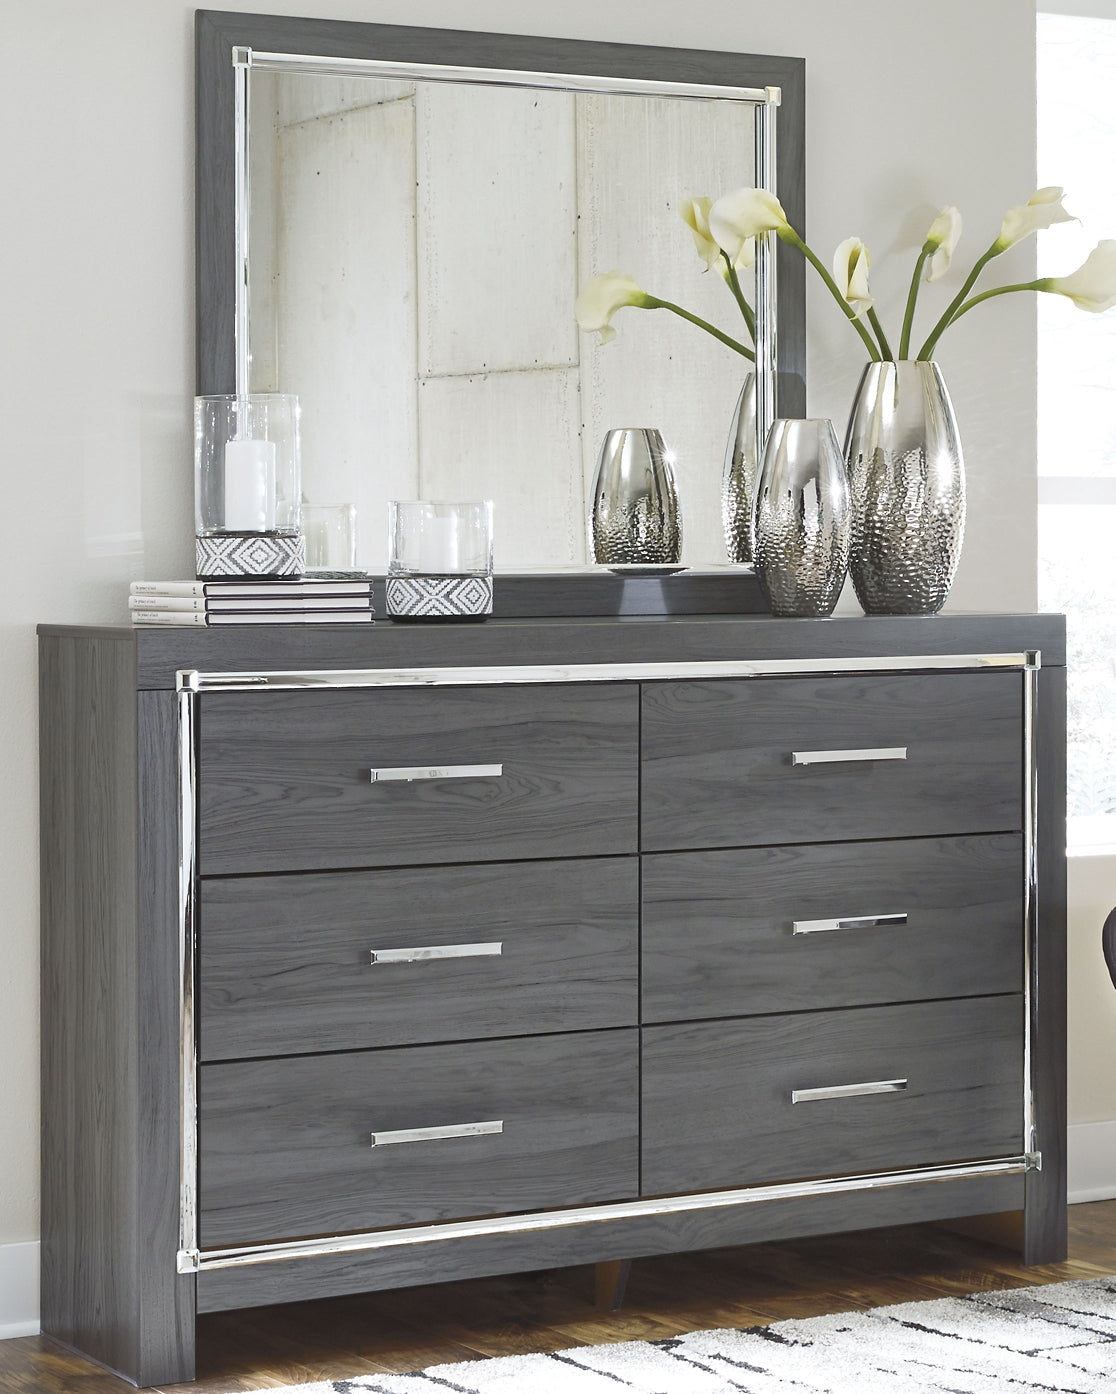 Lodanna Queen Panel Bed with Mirrored Dresser and Nightstand Signature Design by Ashley®